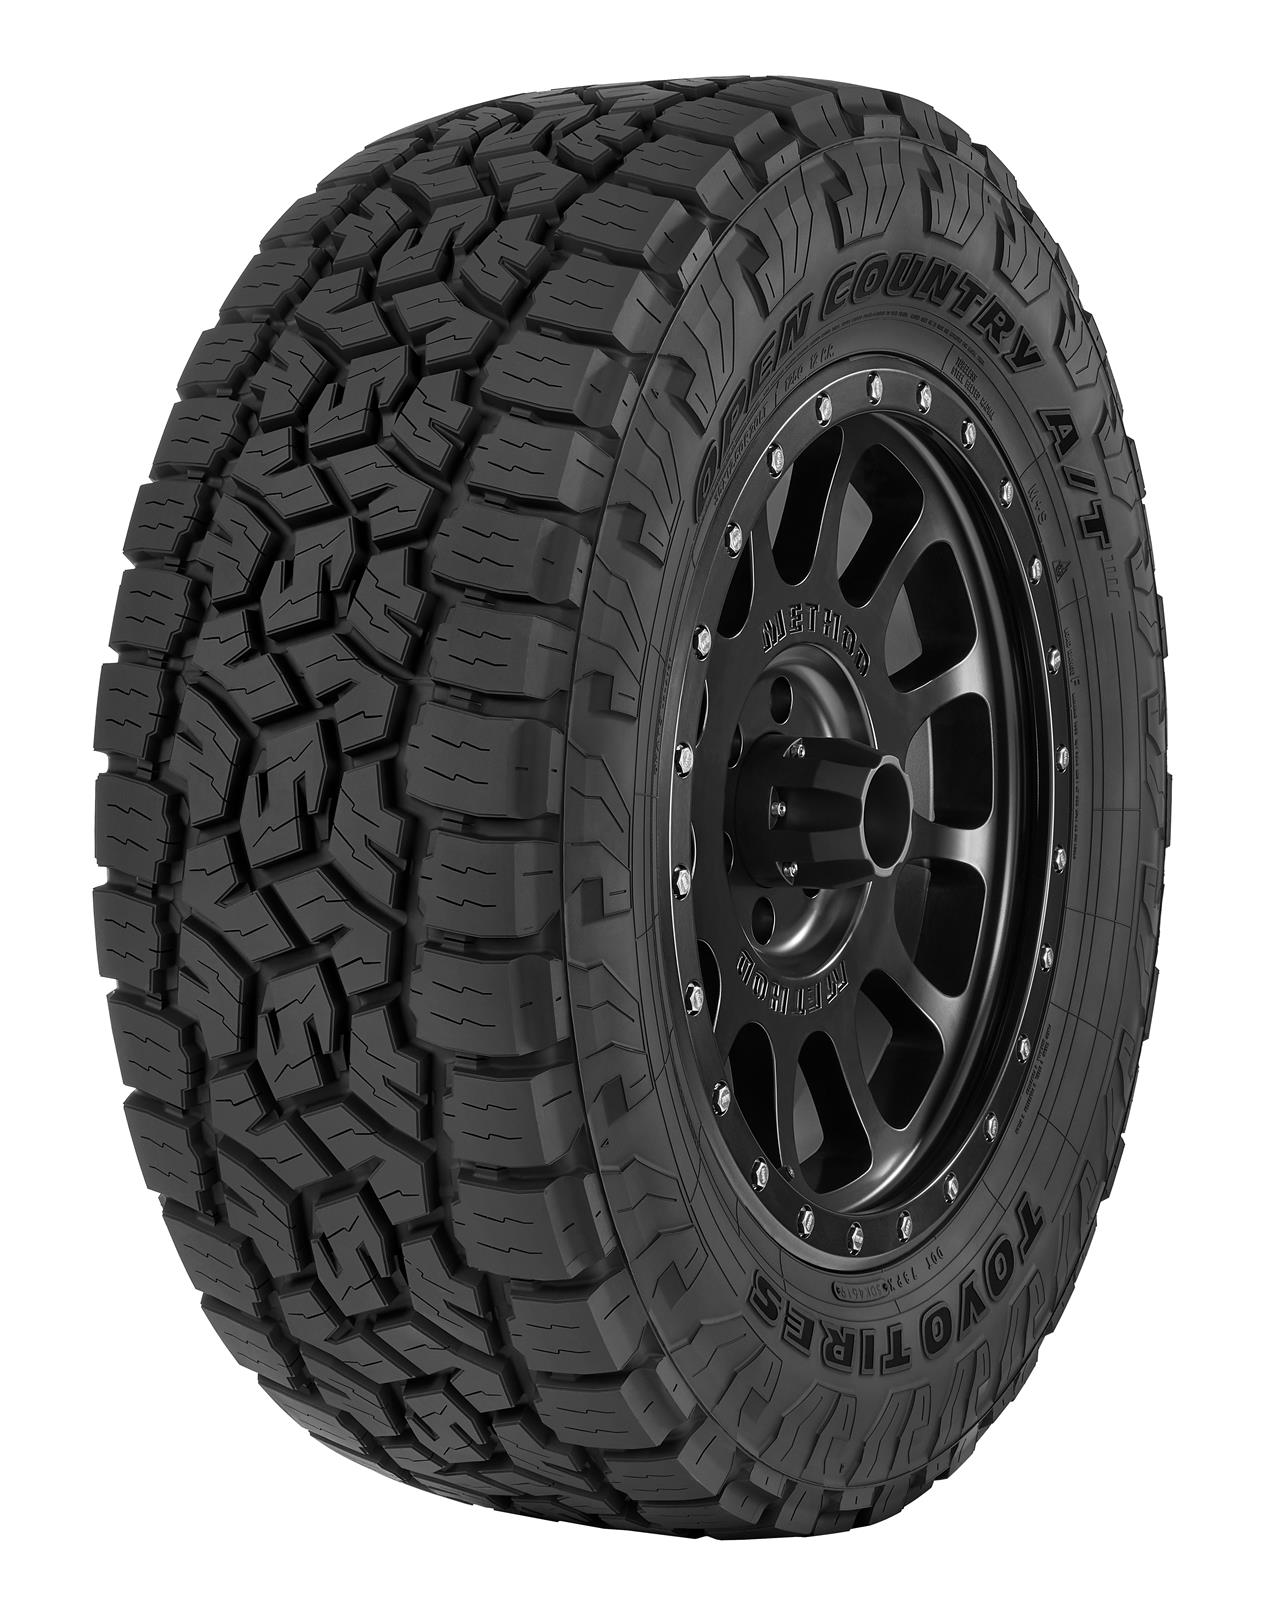 Toyo Tires 355640 Toyo Open Country A/T III Tires | Summit Racing